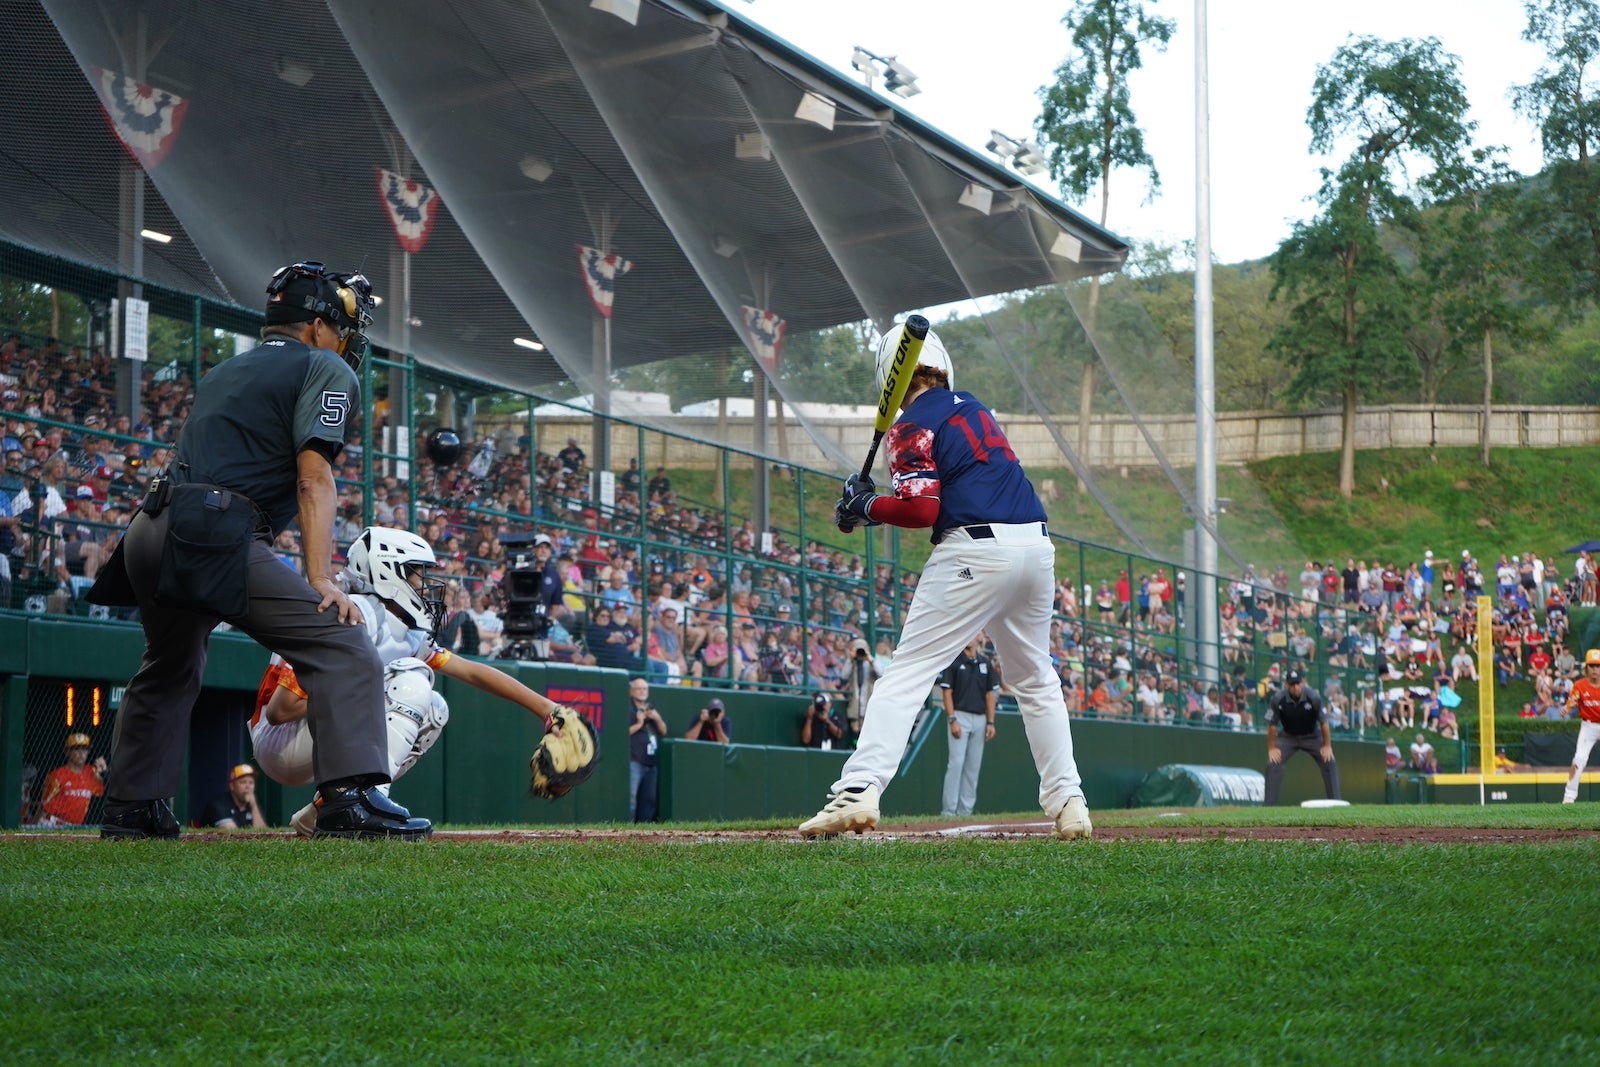 Everybody hits at the Little League World Series